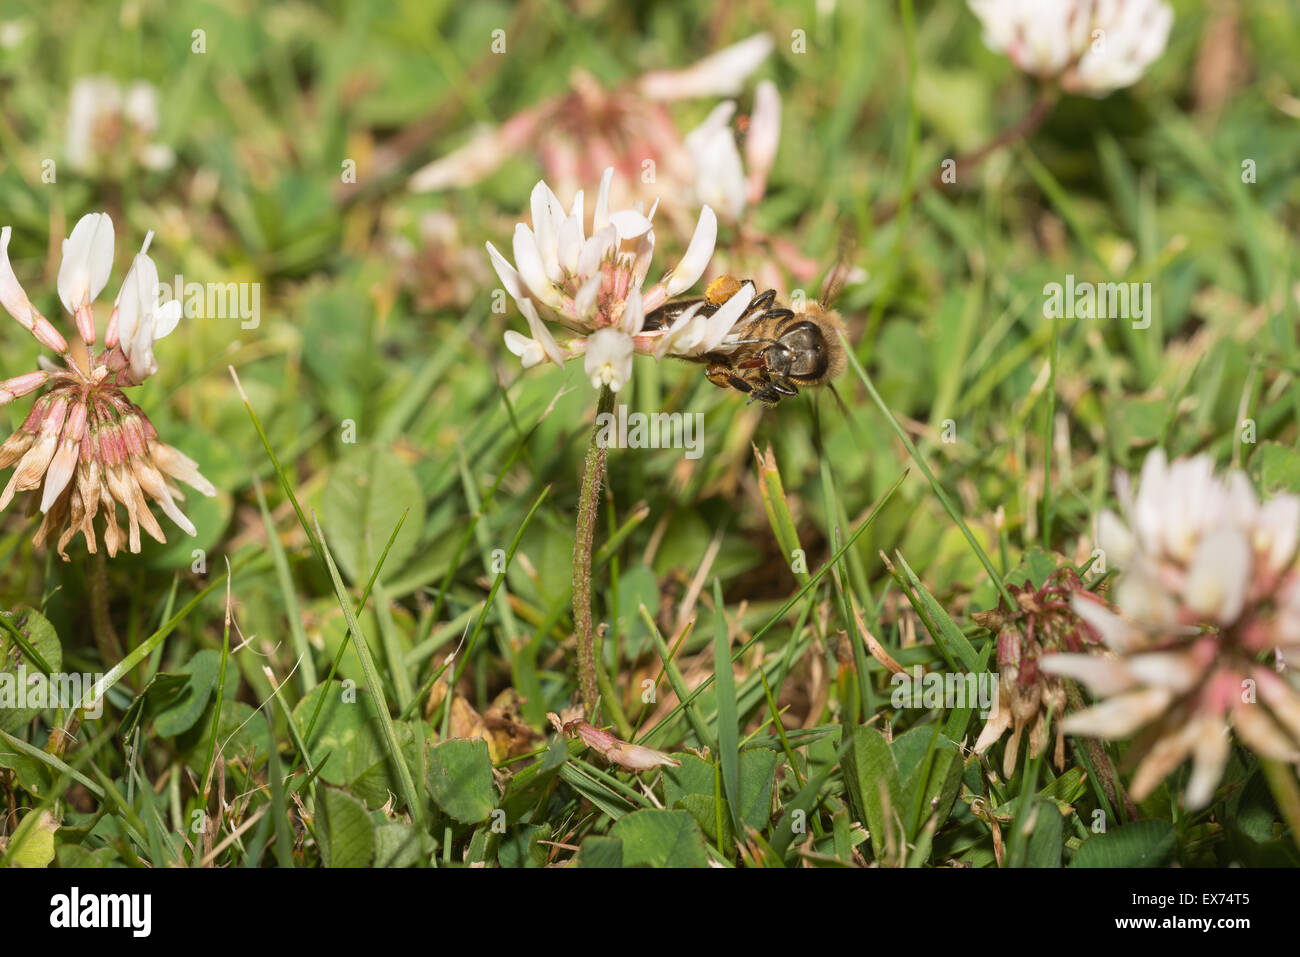 Honey bee worker using its long proboscis to drink nectar from white clover flowers before taking off Stock Photo